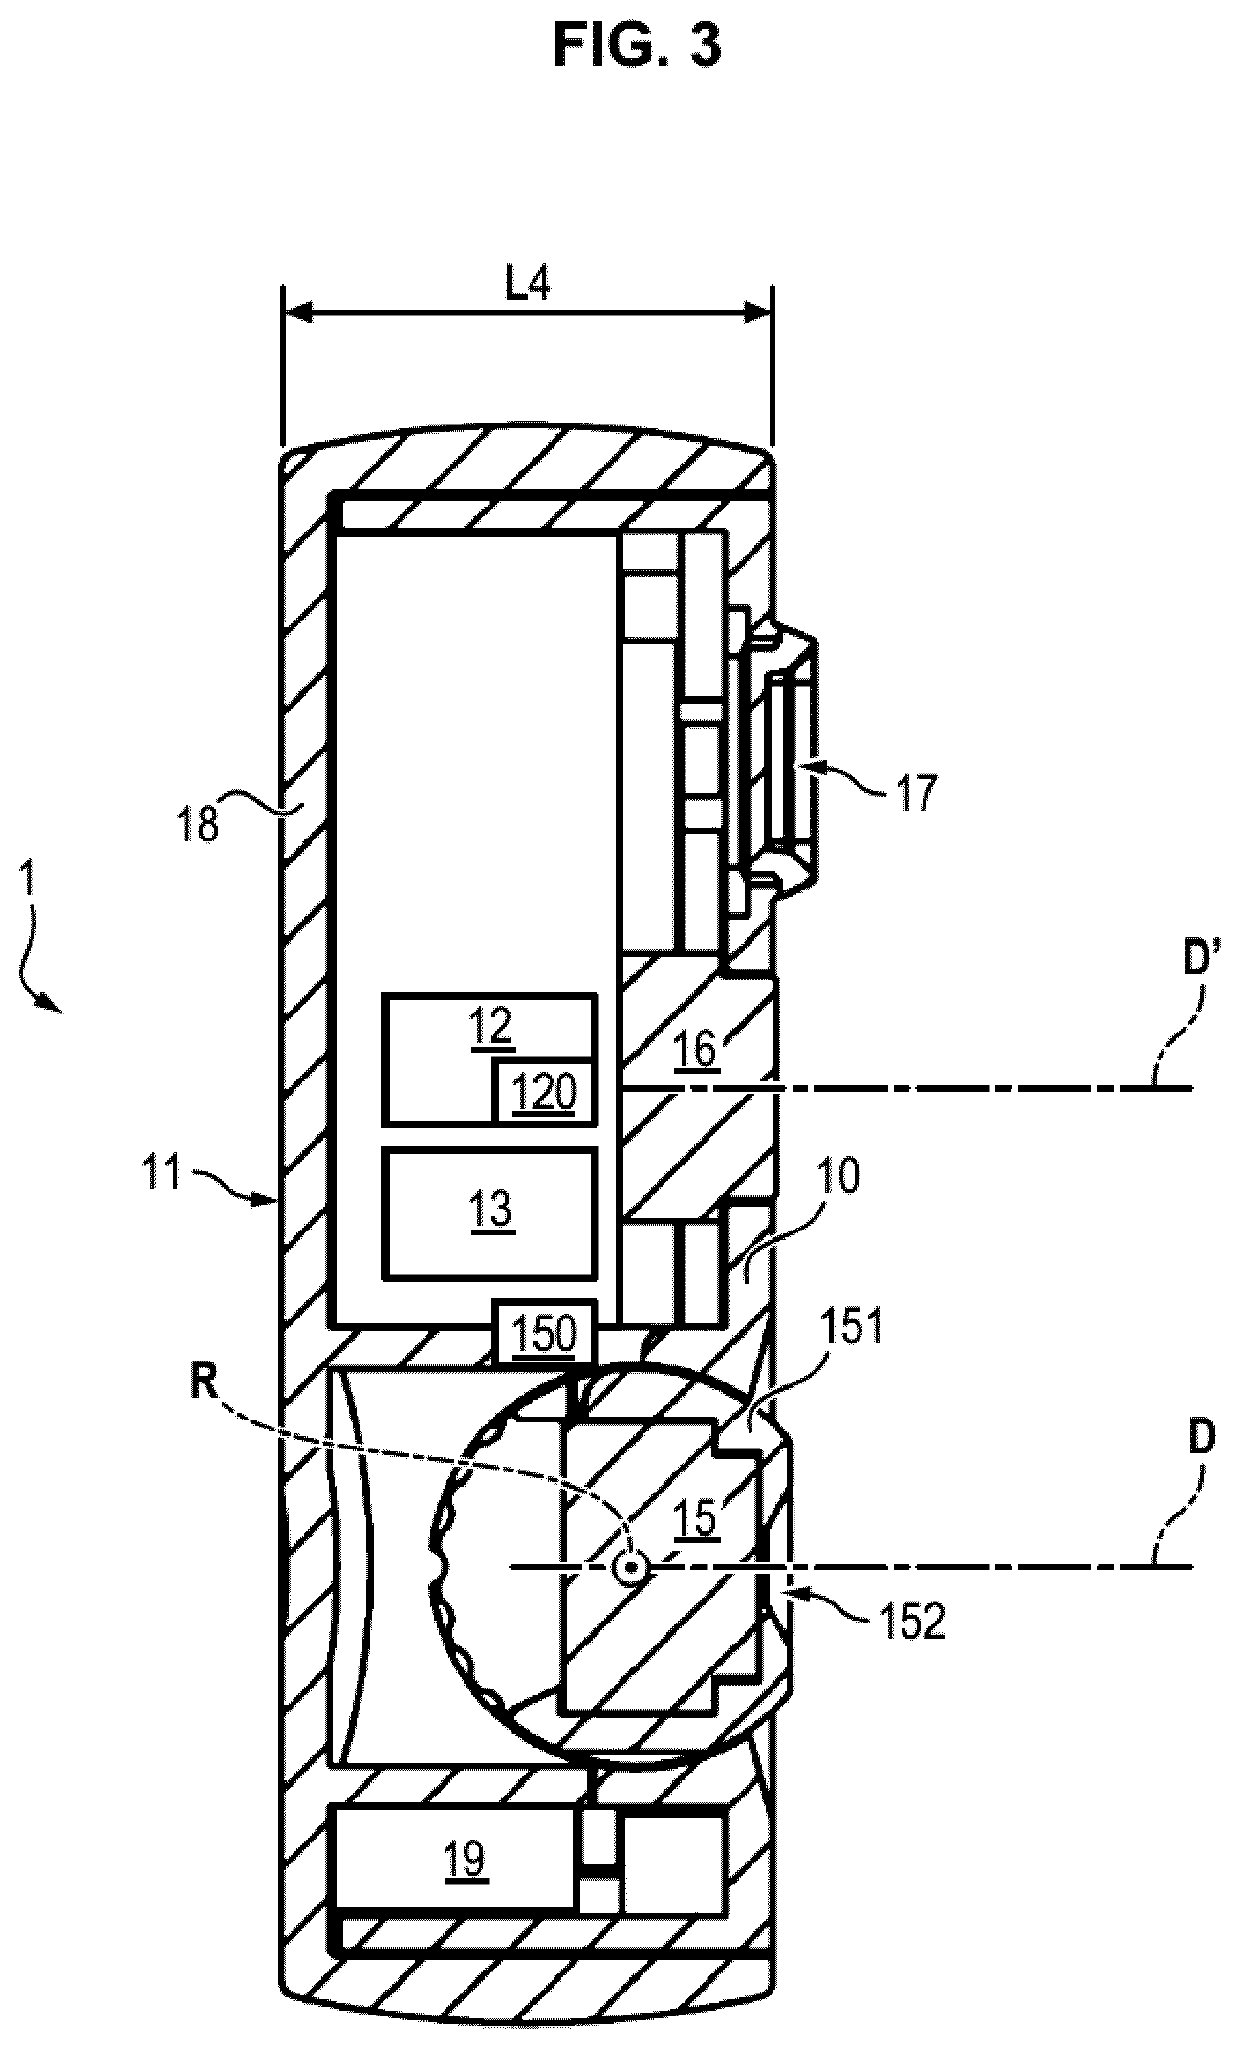 Imaging Device For A Shelf Support And Shelf System Comprising The Imaging Device